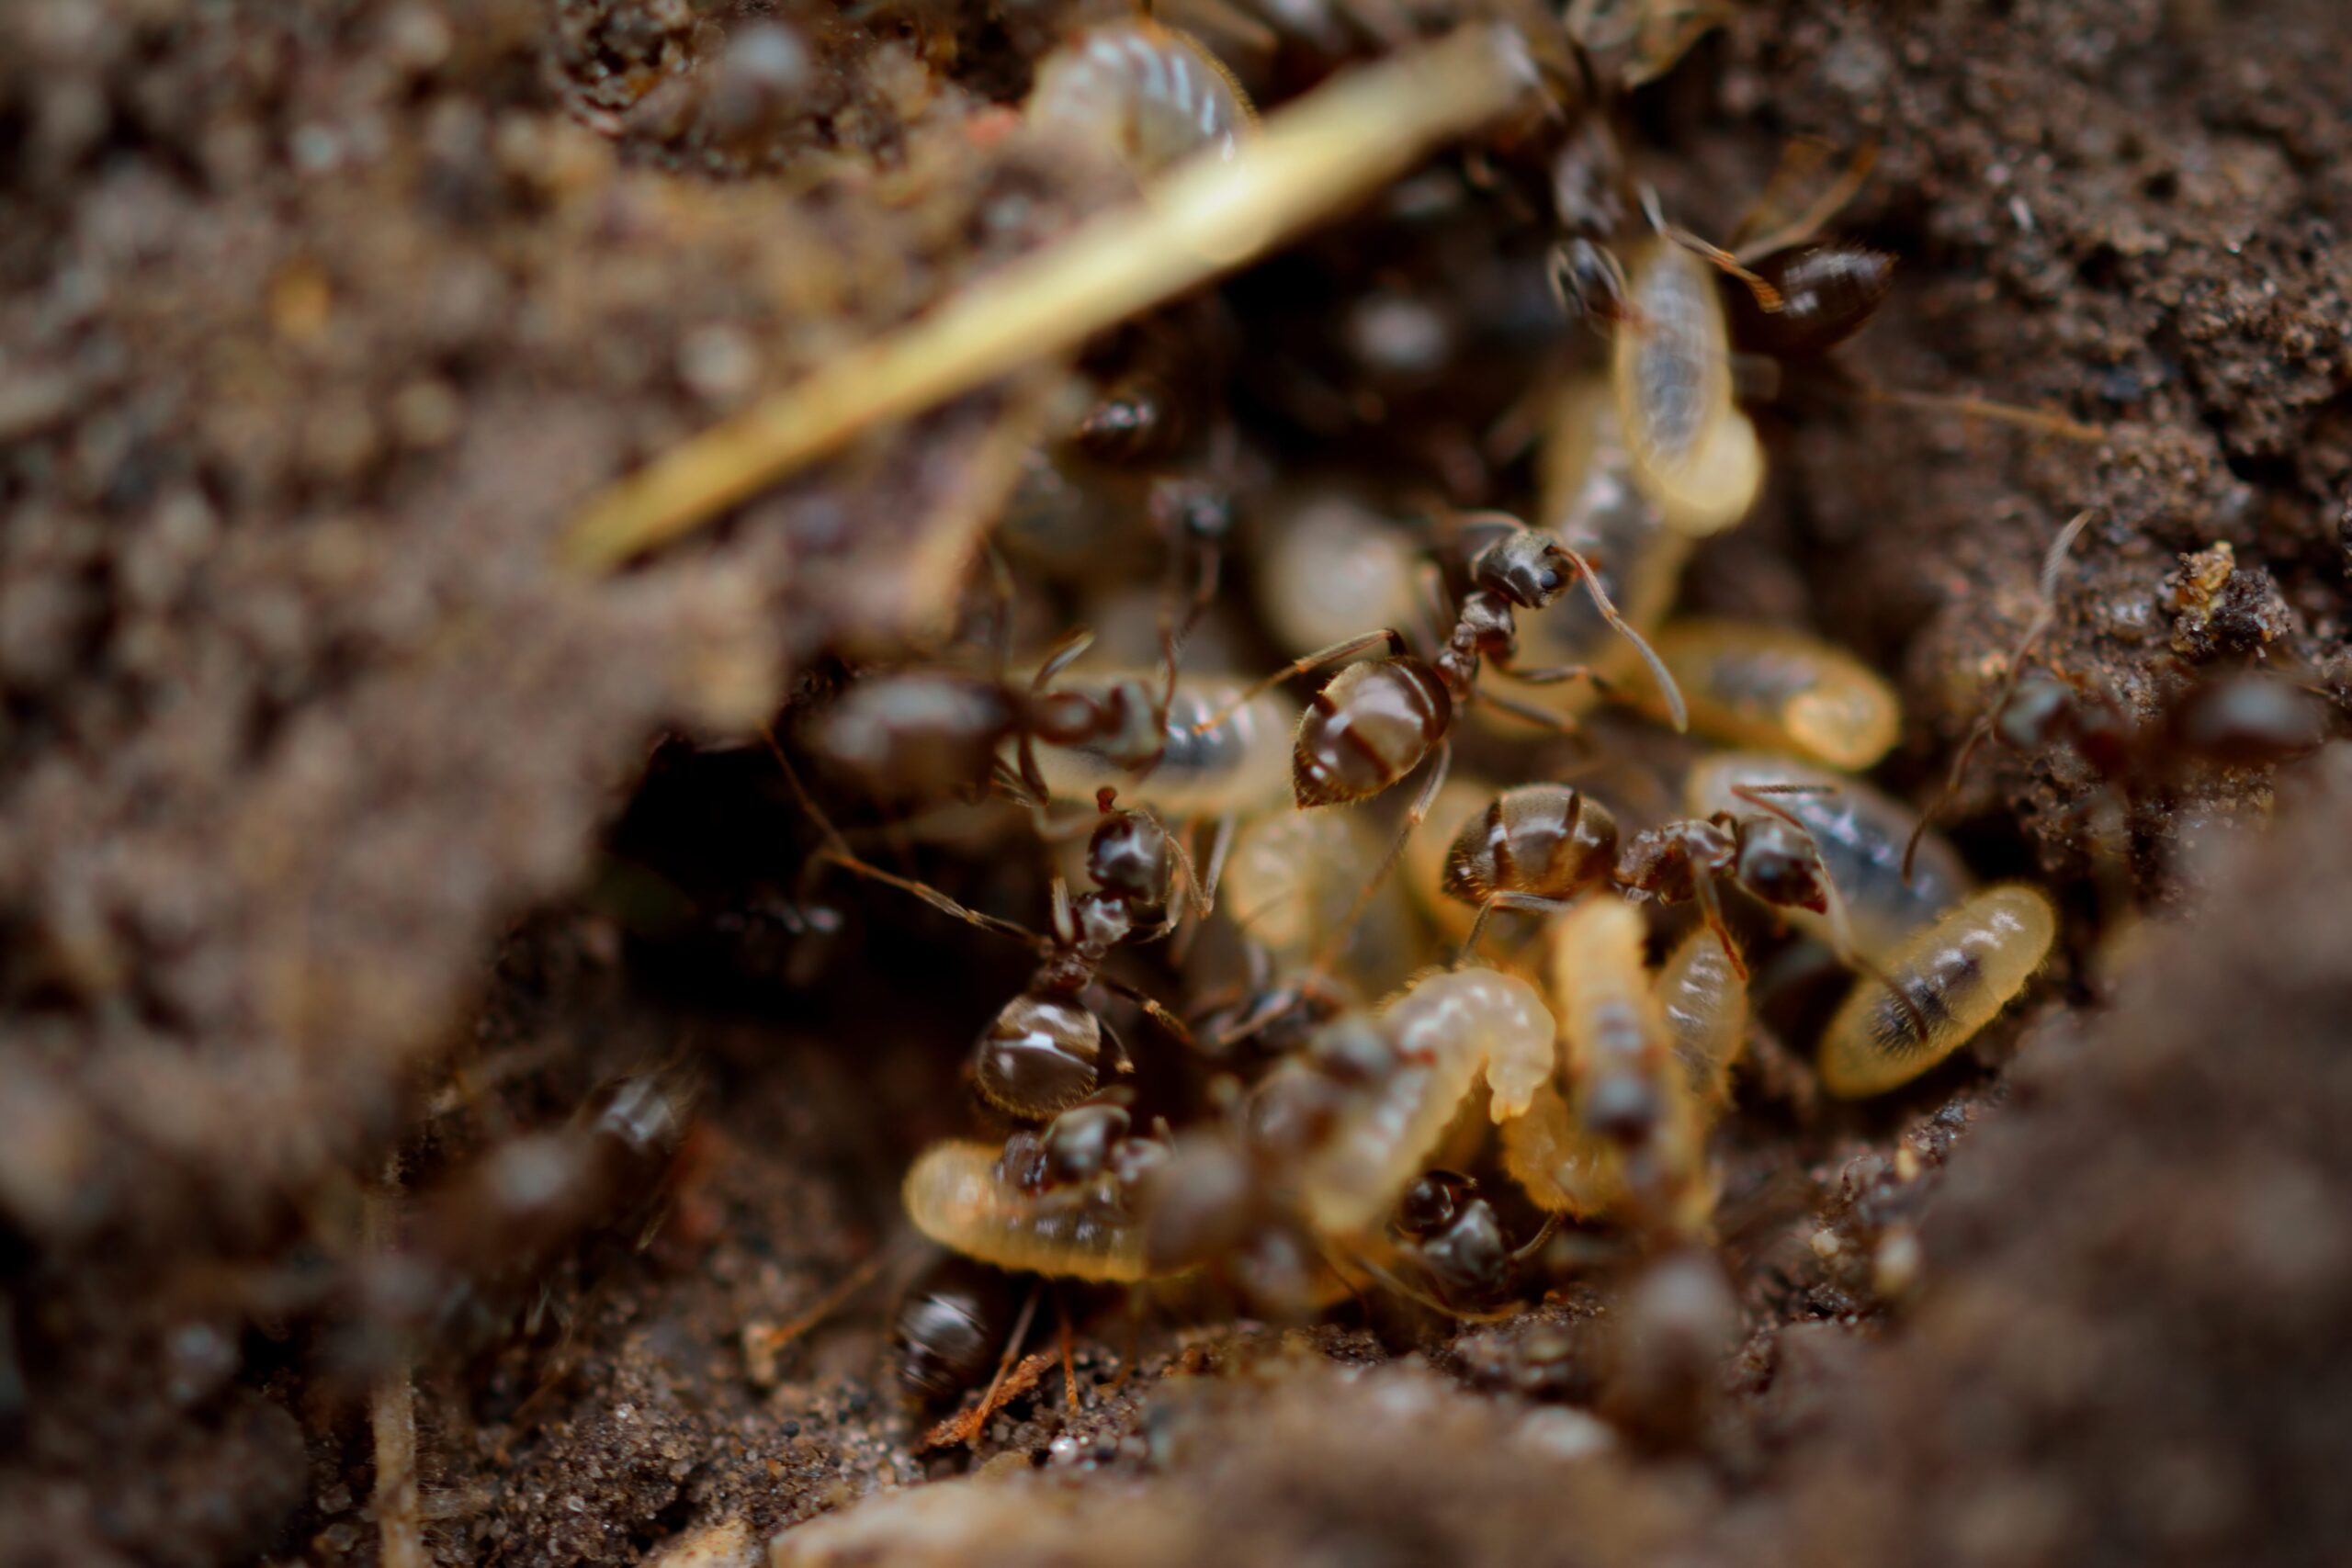 Lifting the lid of the termite farm